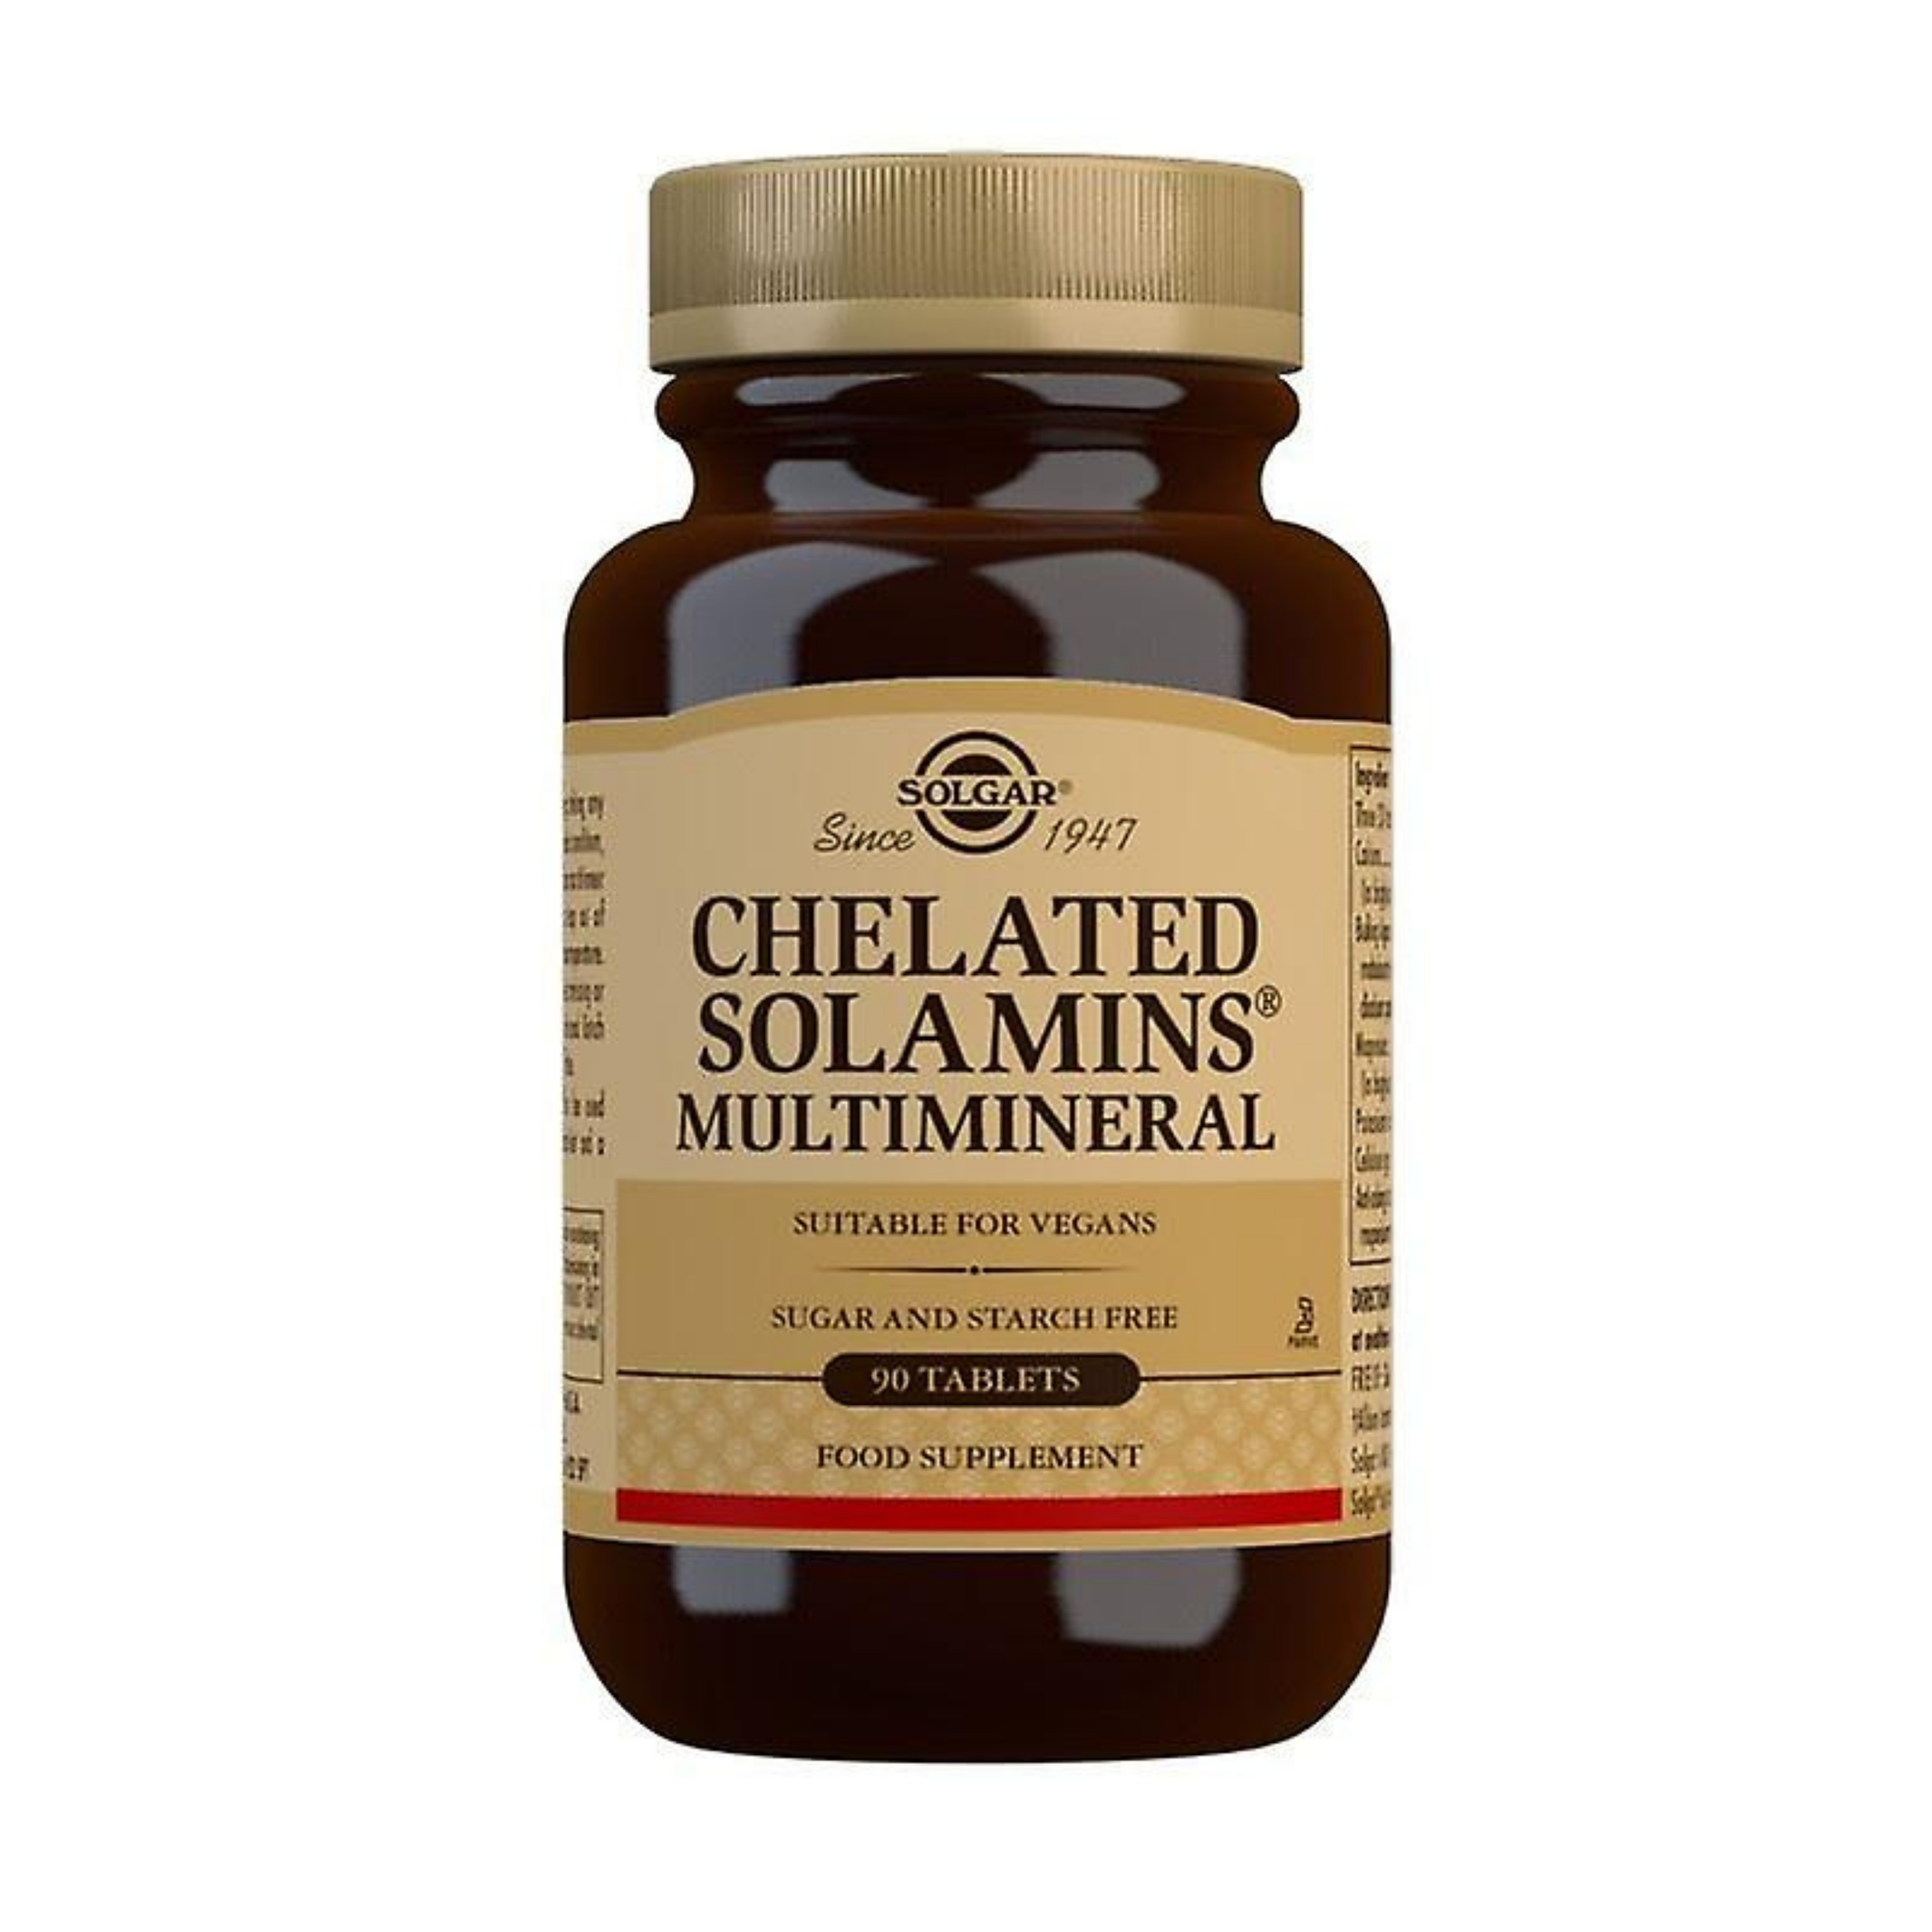 Chelated Solamins Multimineral 90t